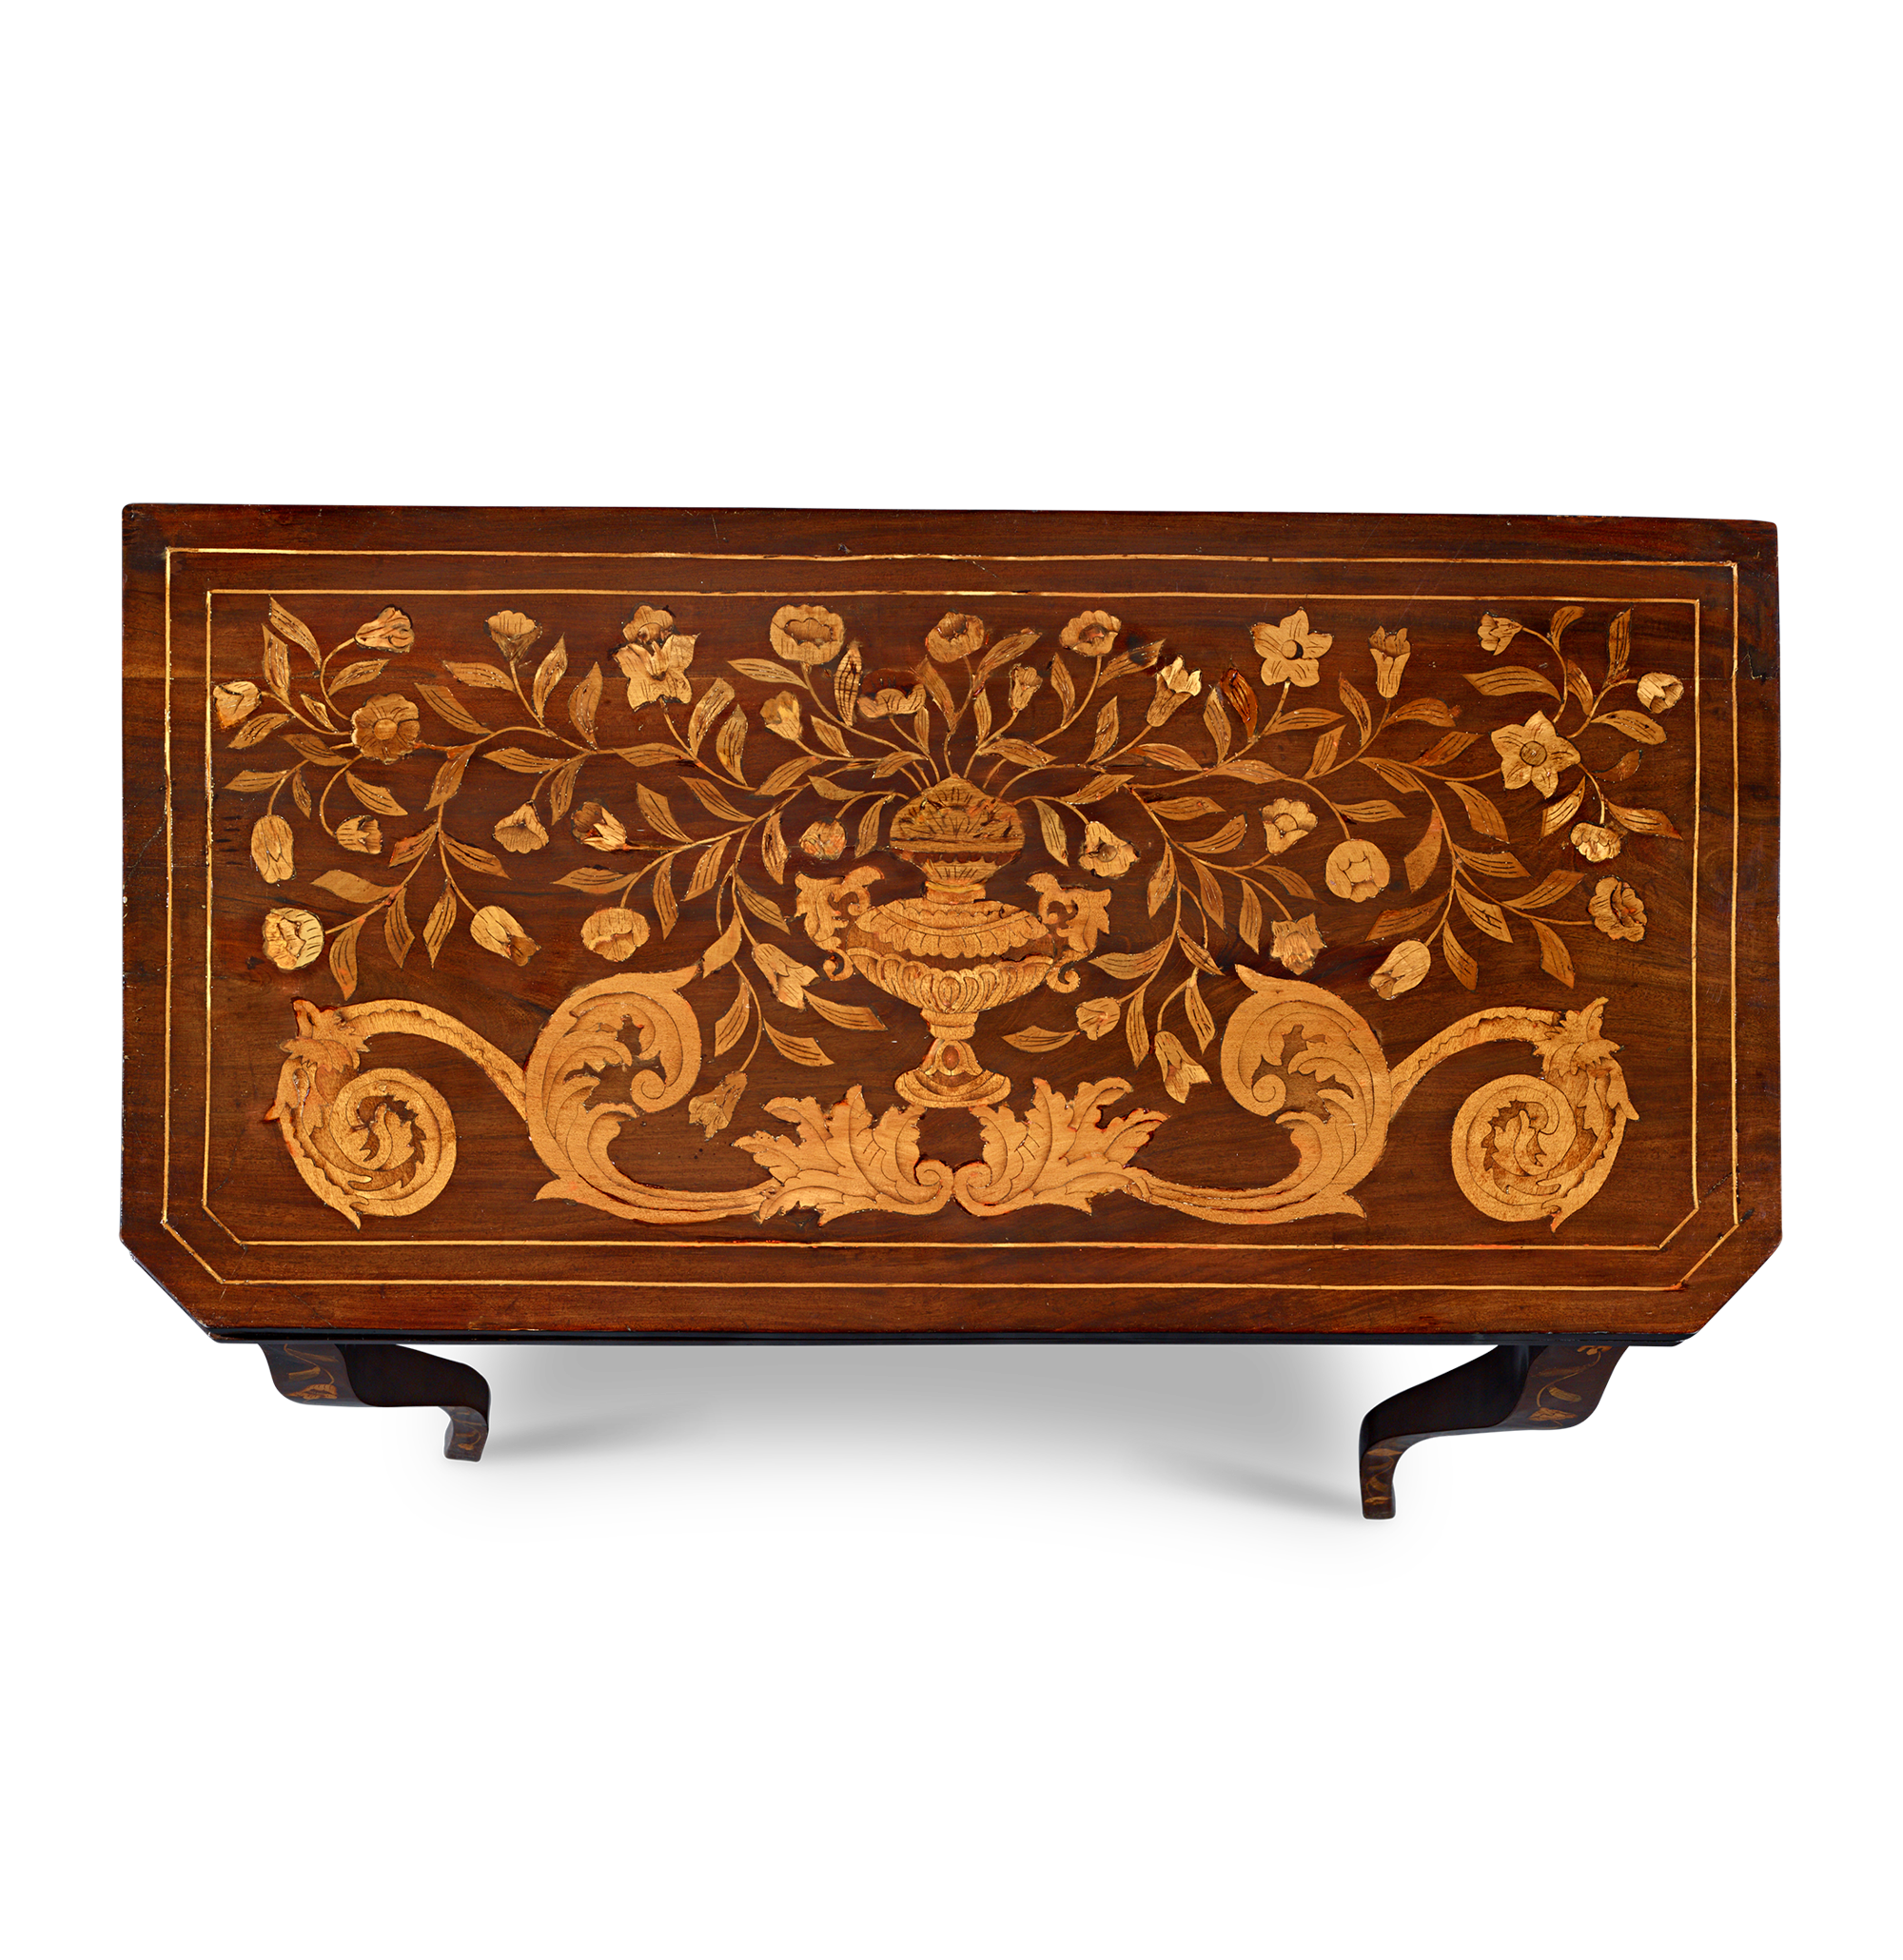 Dutch Marquetry Game Table